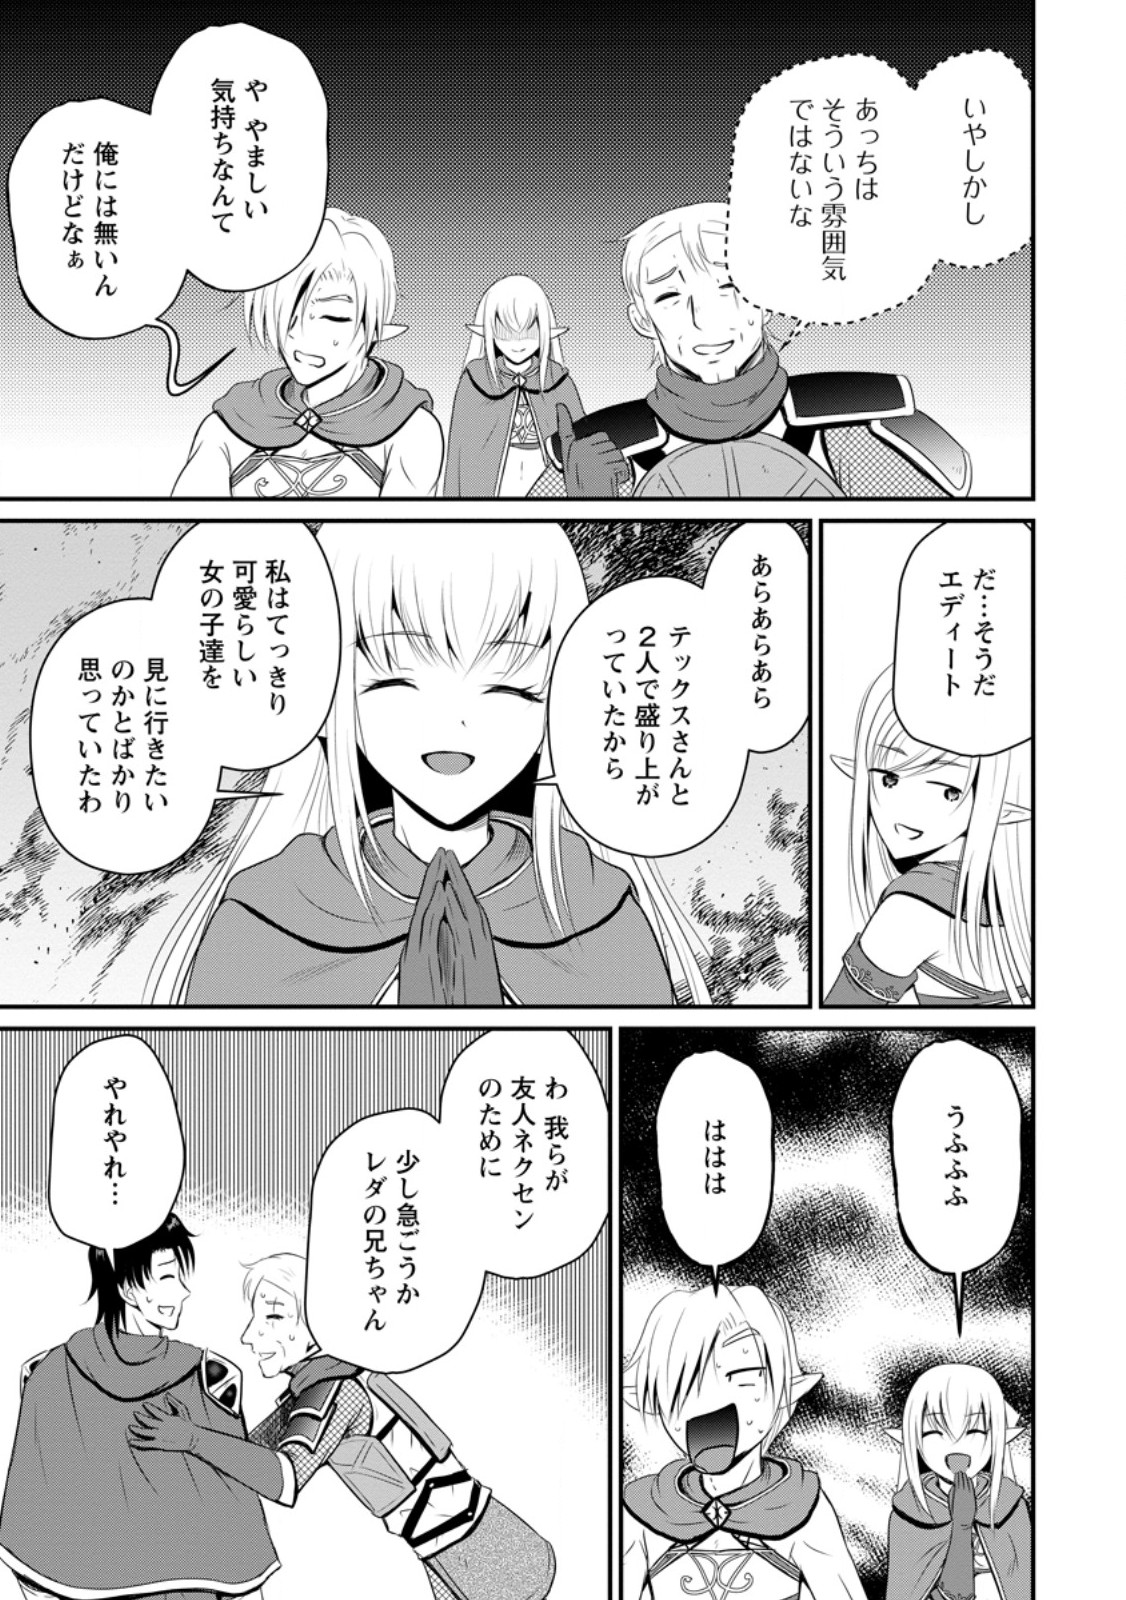 The Frontier Life of The Low-Class Ossan Healer And The Lovery Girl - Chapter 44.1 - Page 9